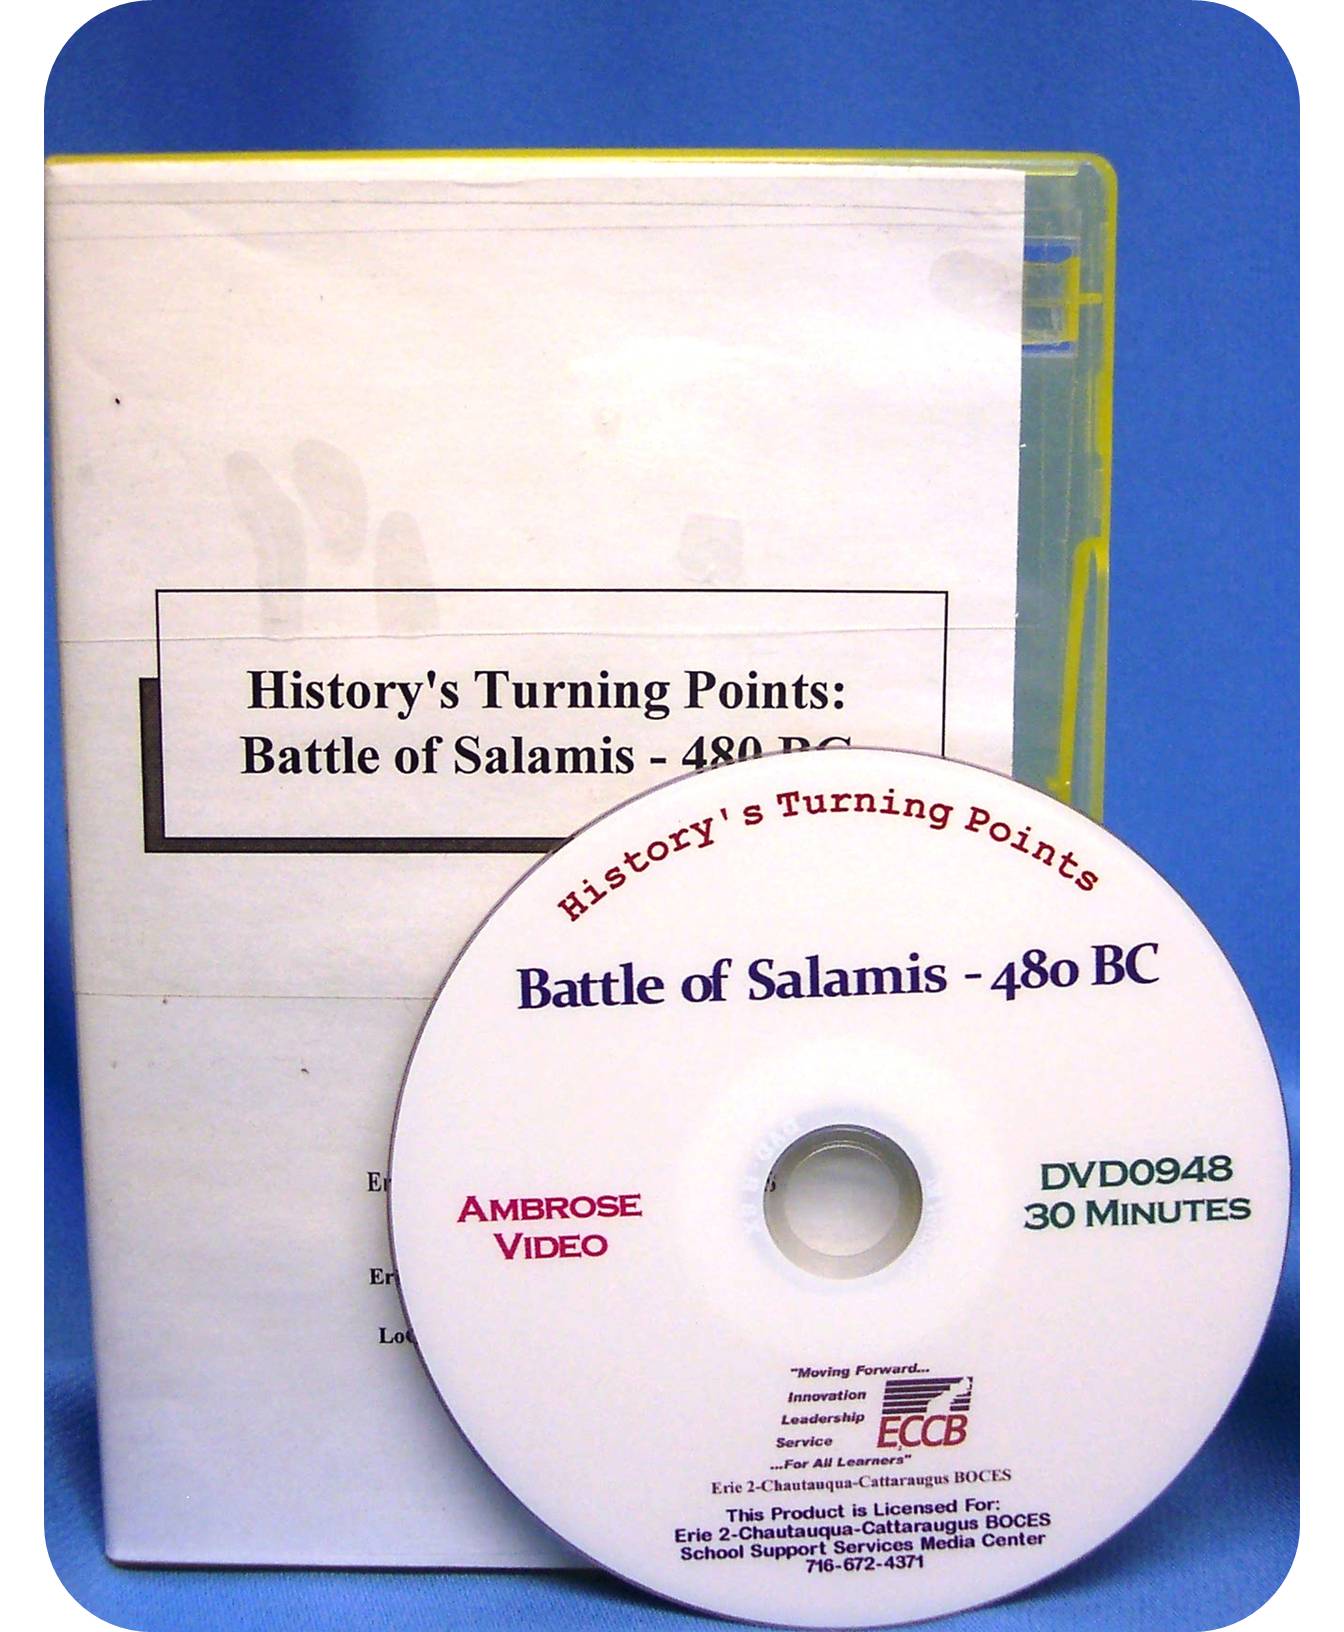 History's Turning Points: Battle of Salamis - 480 BC